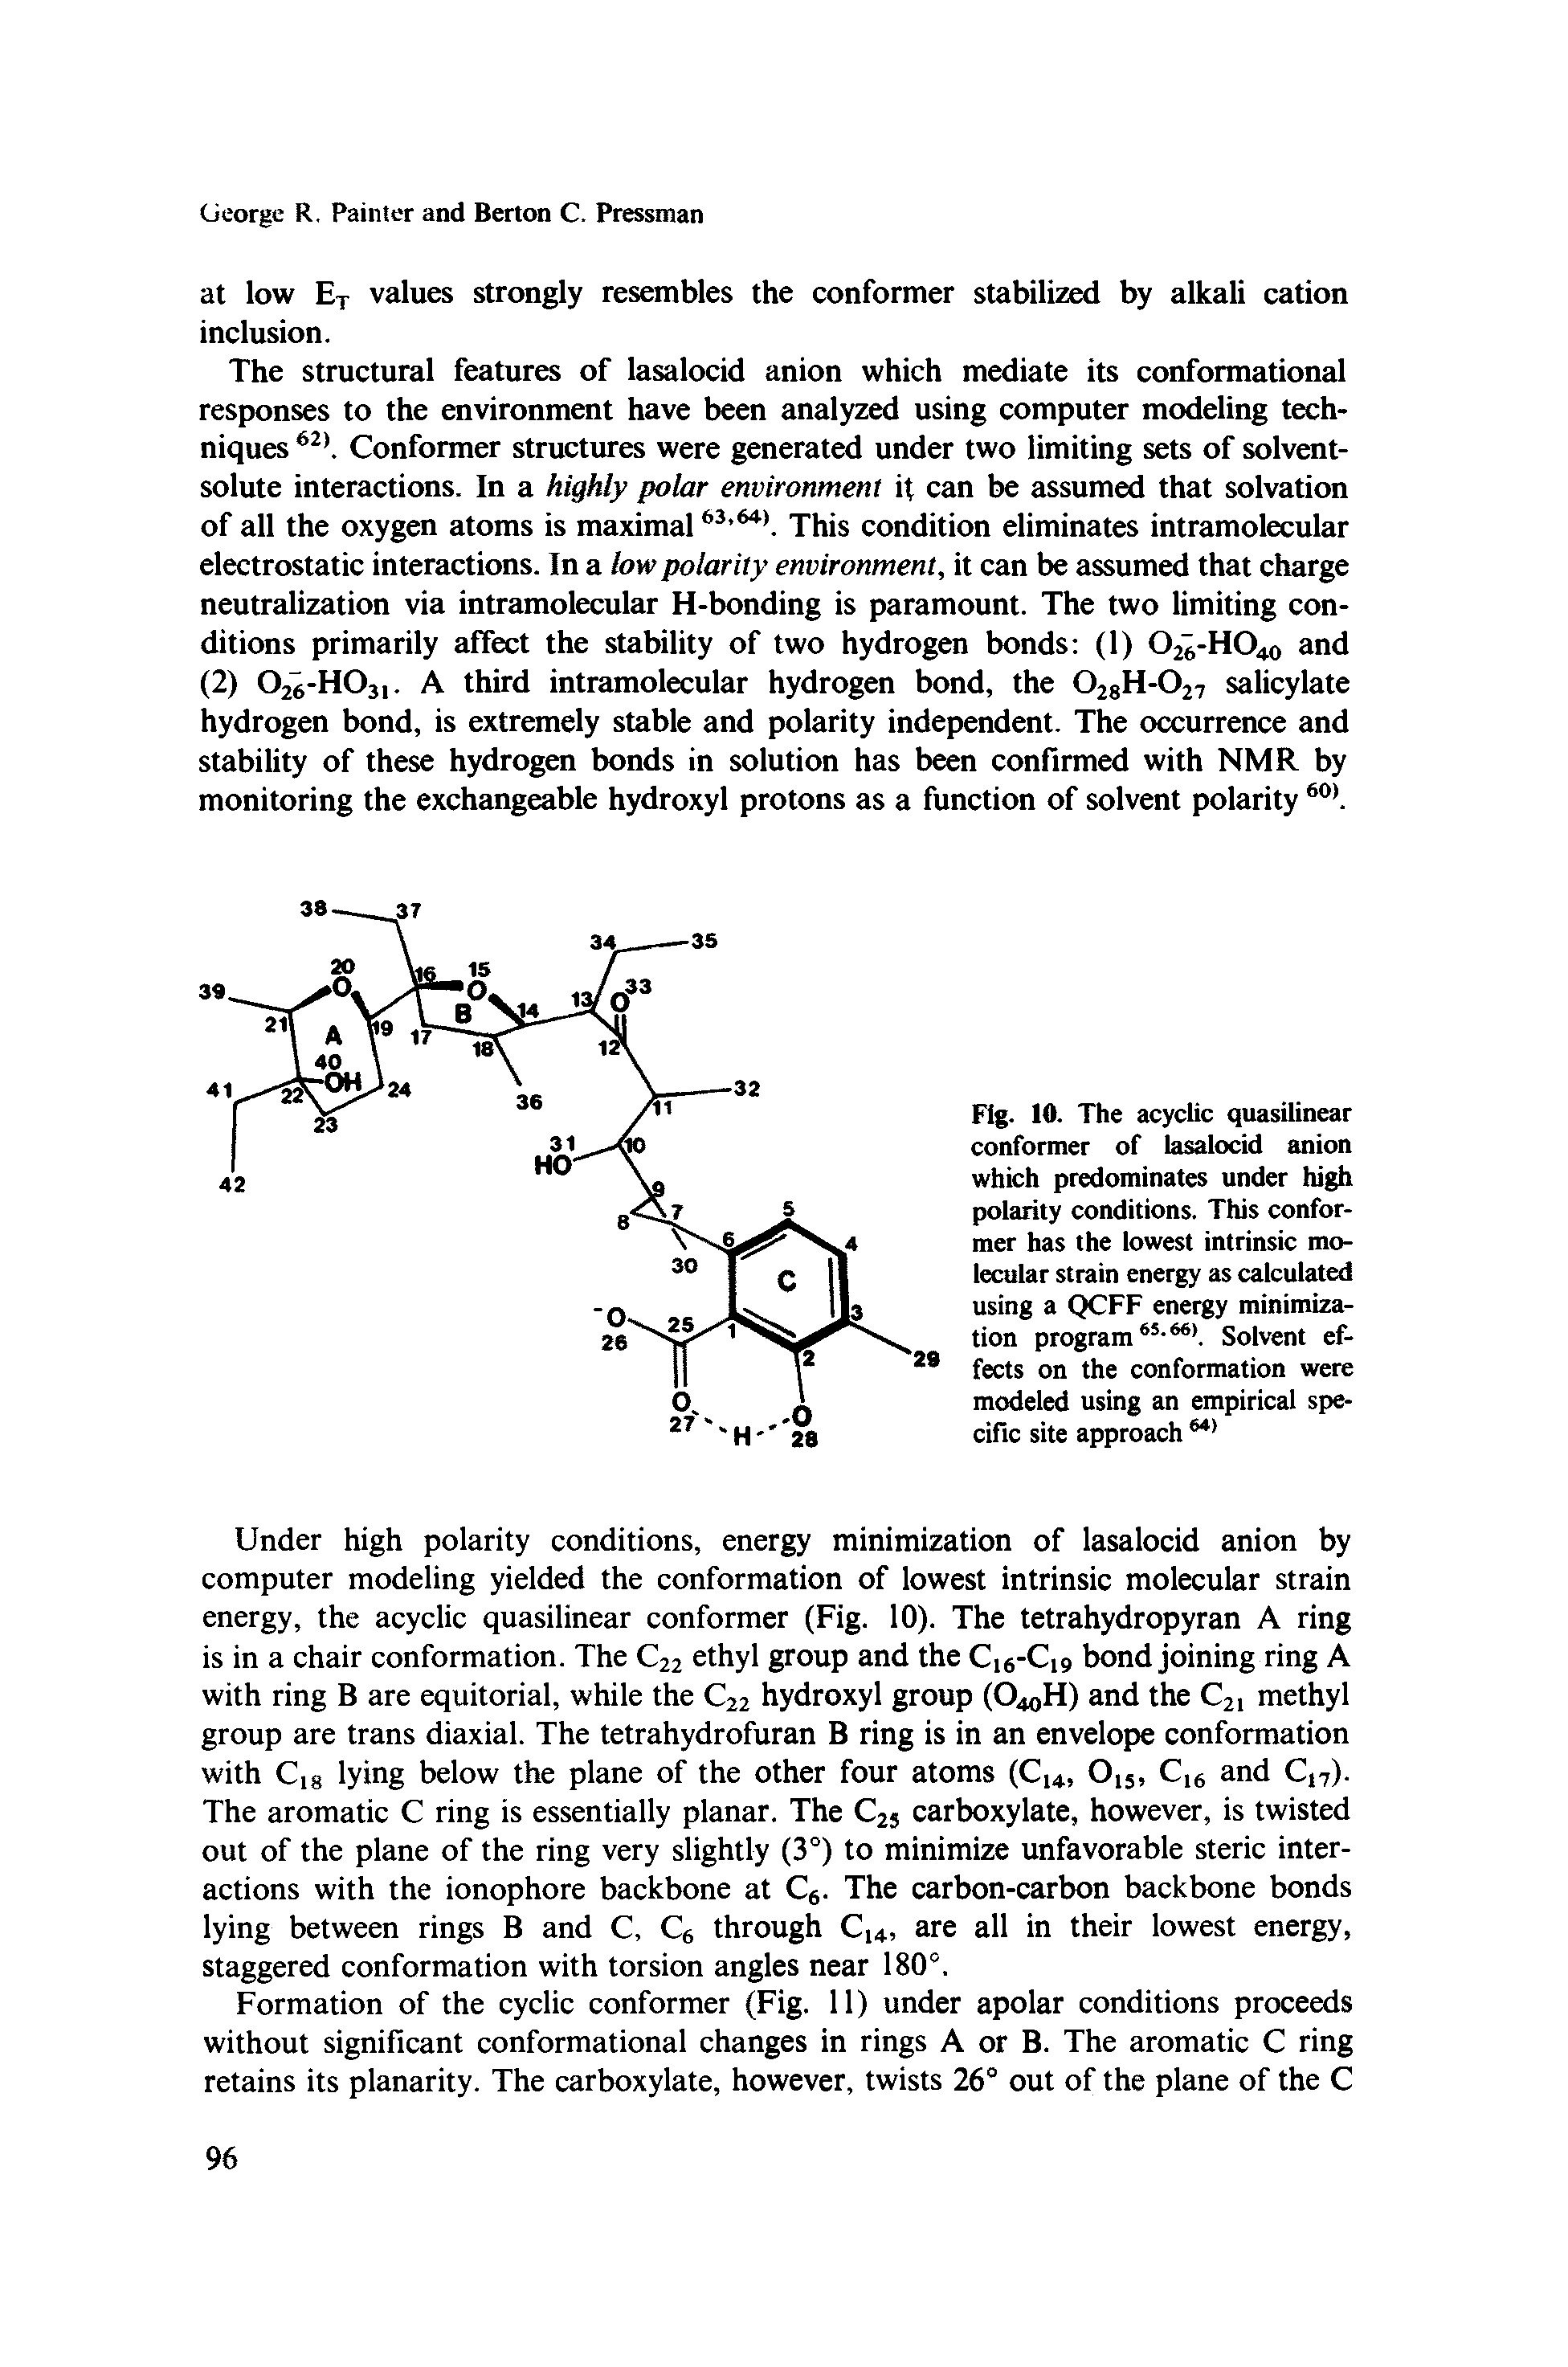 Fig. 10. The acyclic quasilinear conformer of lasalocid anion which predominates under high polarity conditions. This conformer has the lowest intrinsic molecular strain energy as calculated using a QCFF energy minimization program - . Solvent effects on the conformation were modeled using an empirical specific site approach ...